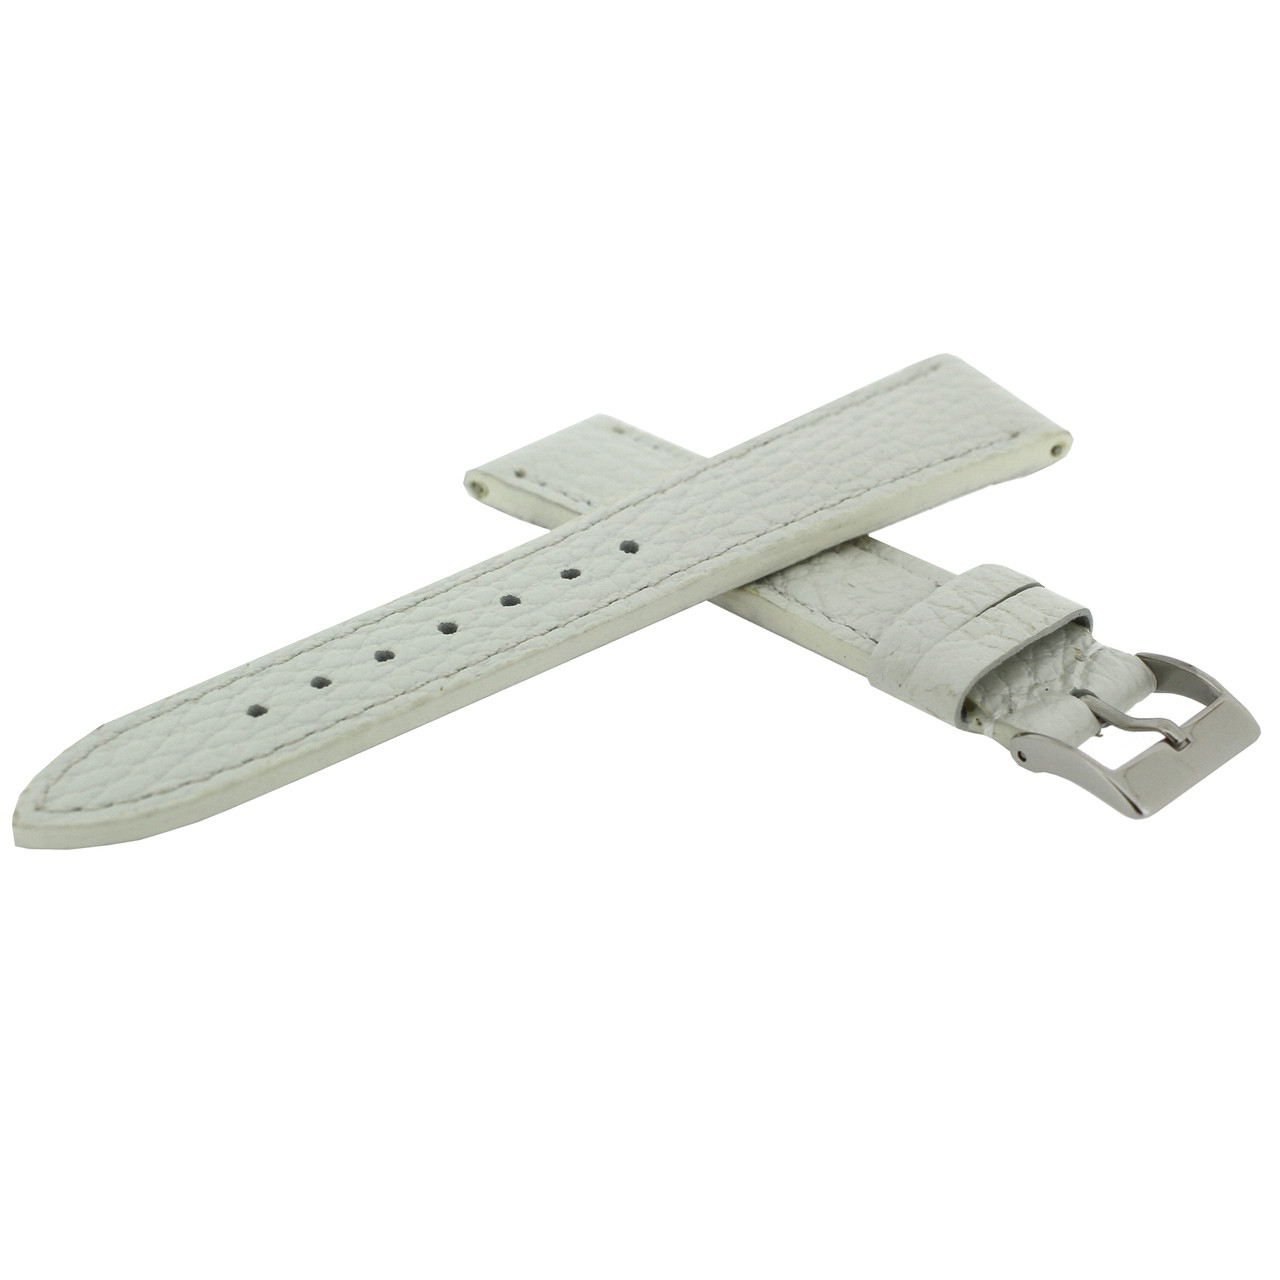 Watch Band Metallic White Leather Padded Built-In Spring Bars - Main